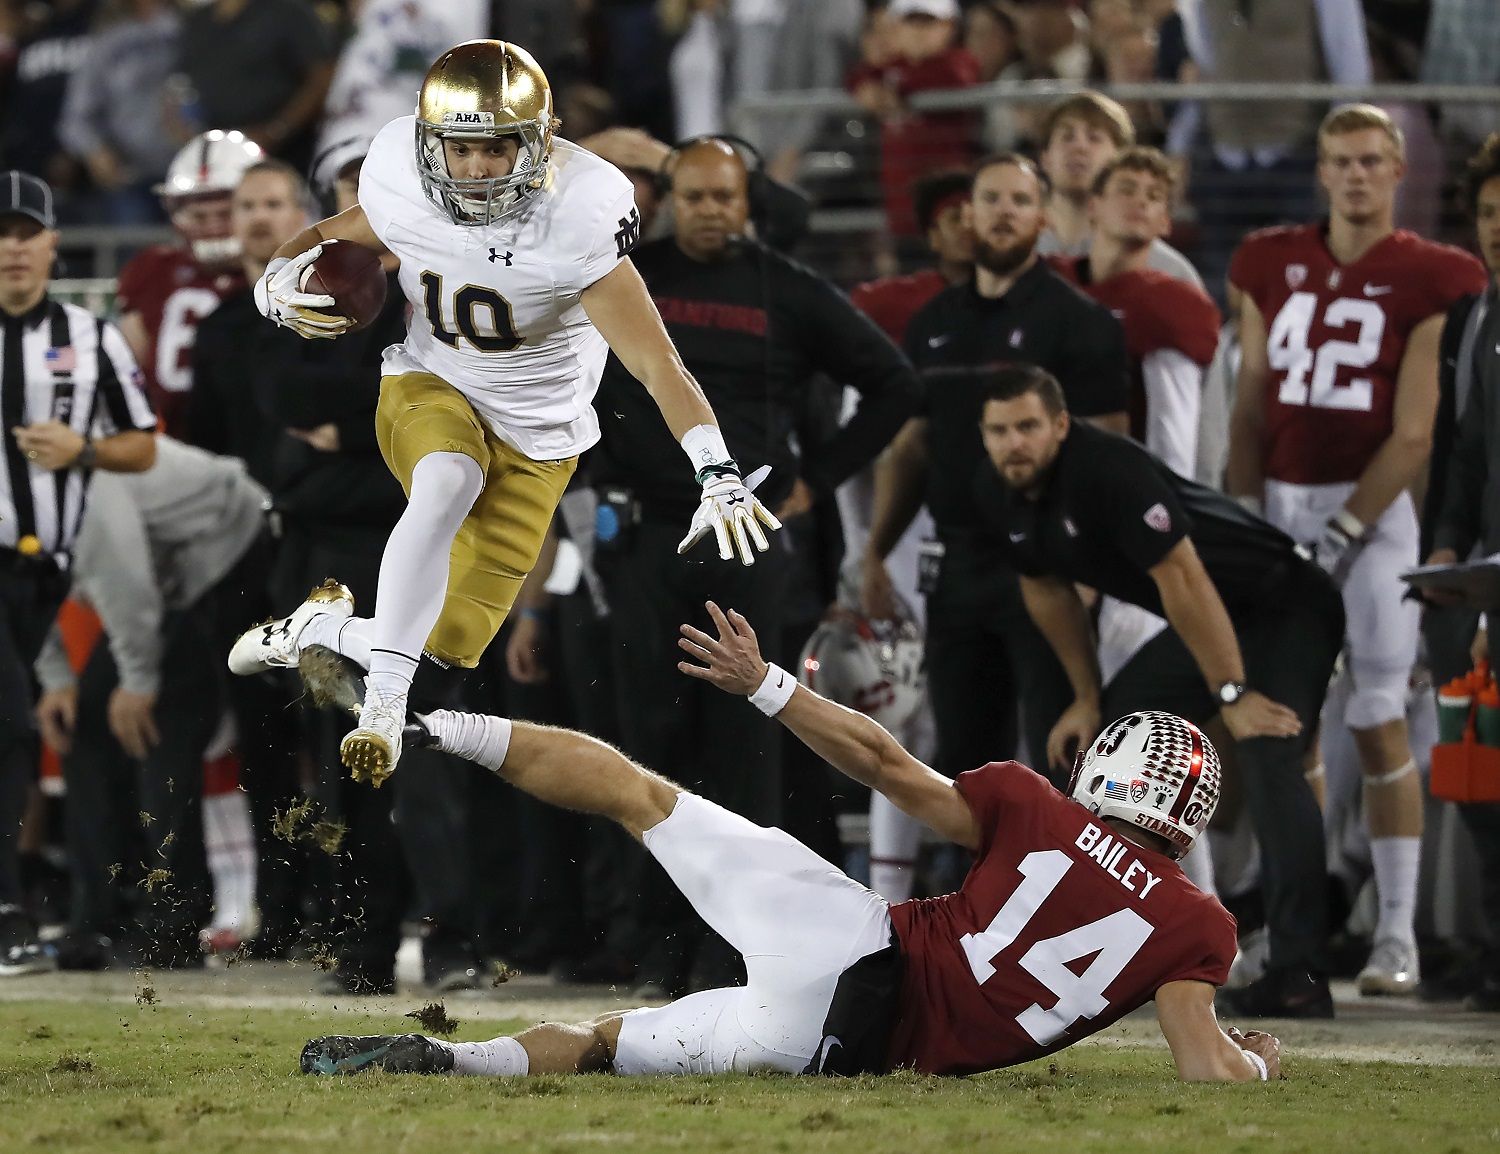 Notre Dame's Chris Finke (10) leaps over Stanford punter Jake Bailey (14) on a punt return during the second half of an NCAA college football game Saturday, Nov. 25, 2017, in Stanford, Calif. Stanford won 38-20. (AP Photo/Tony Avelar)